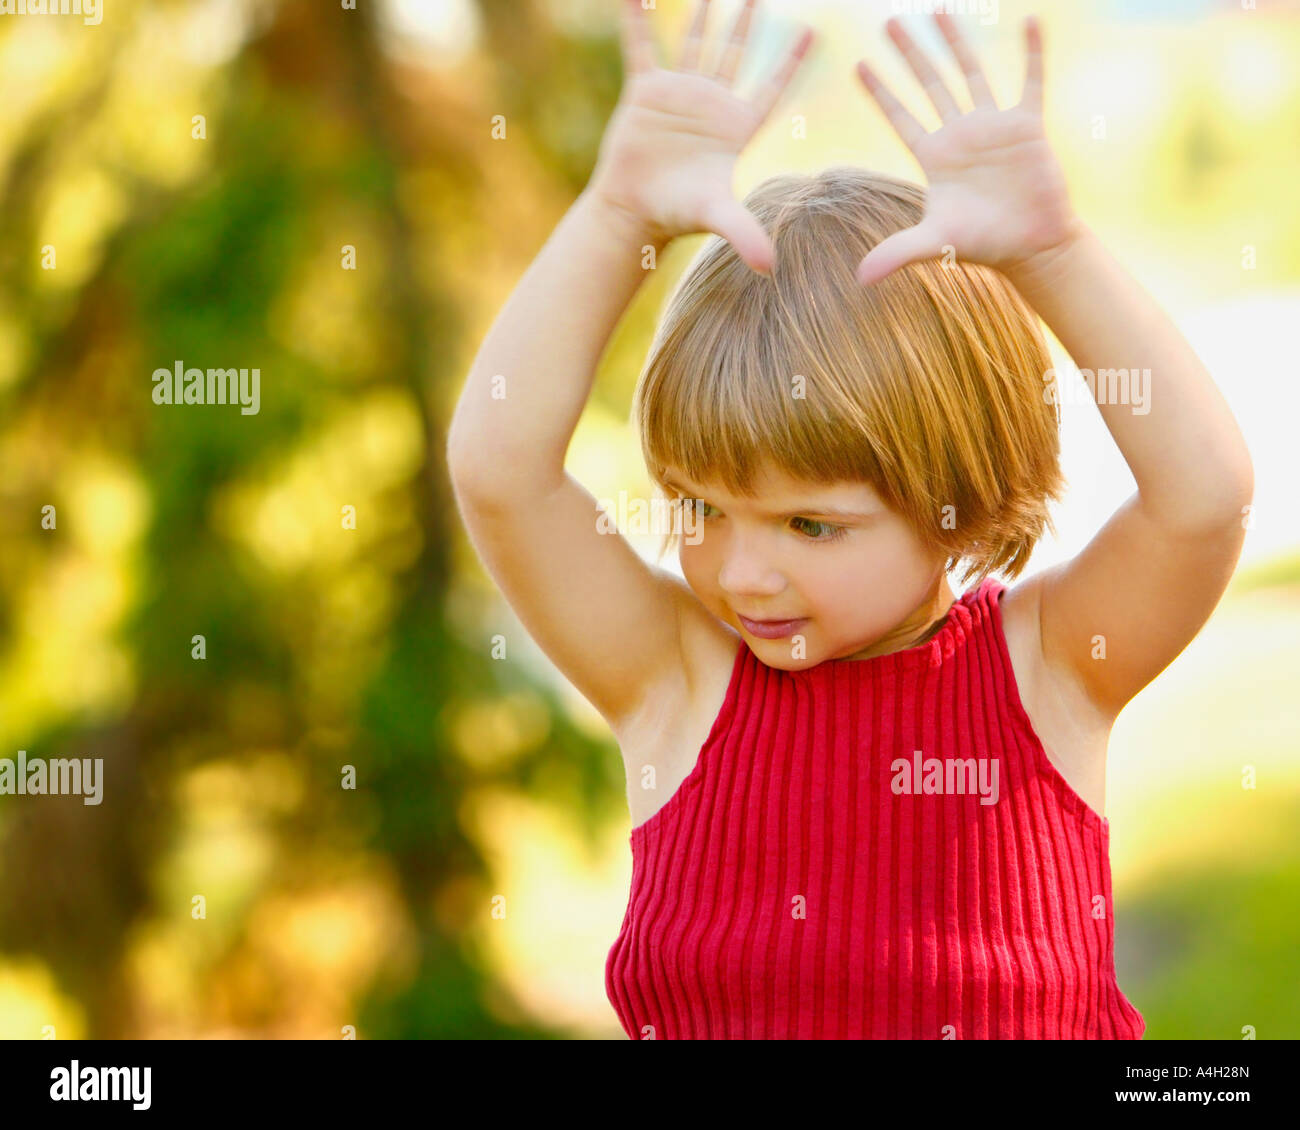 Girl with her arms in the air Stock Photo